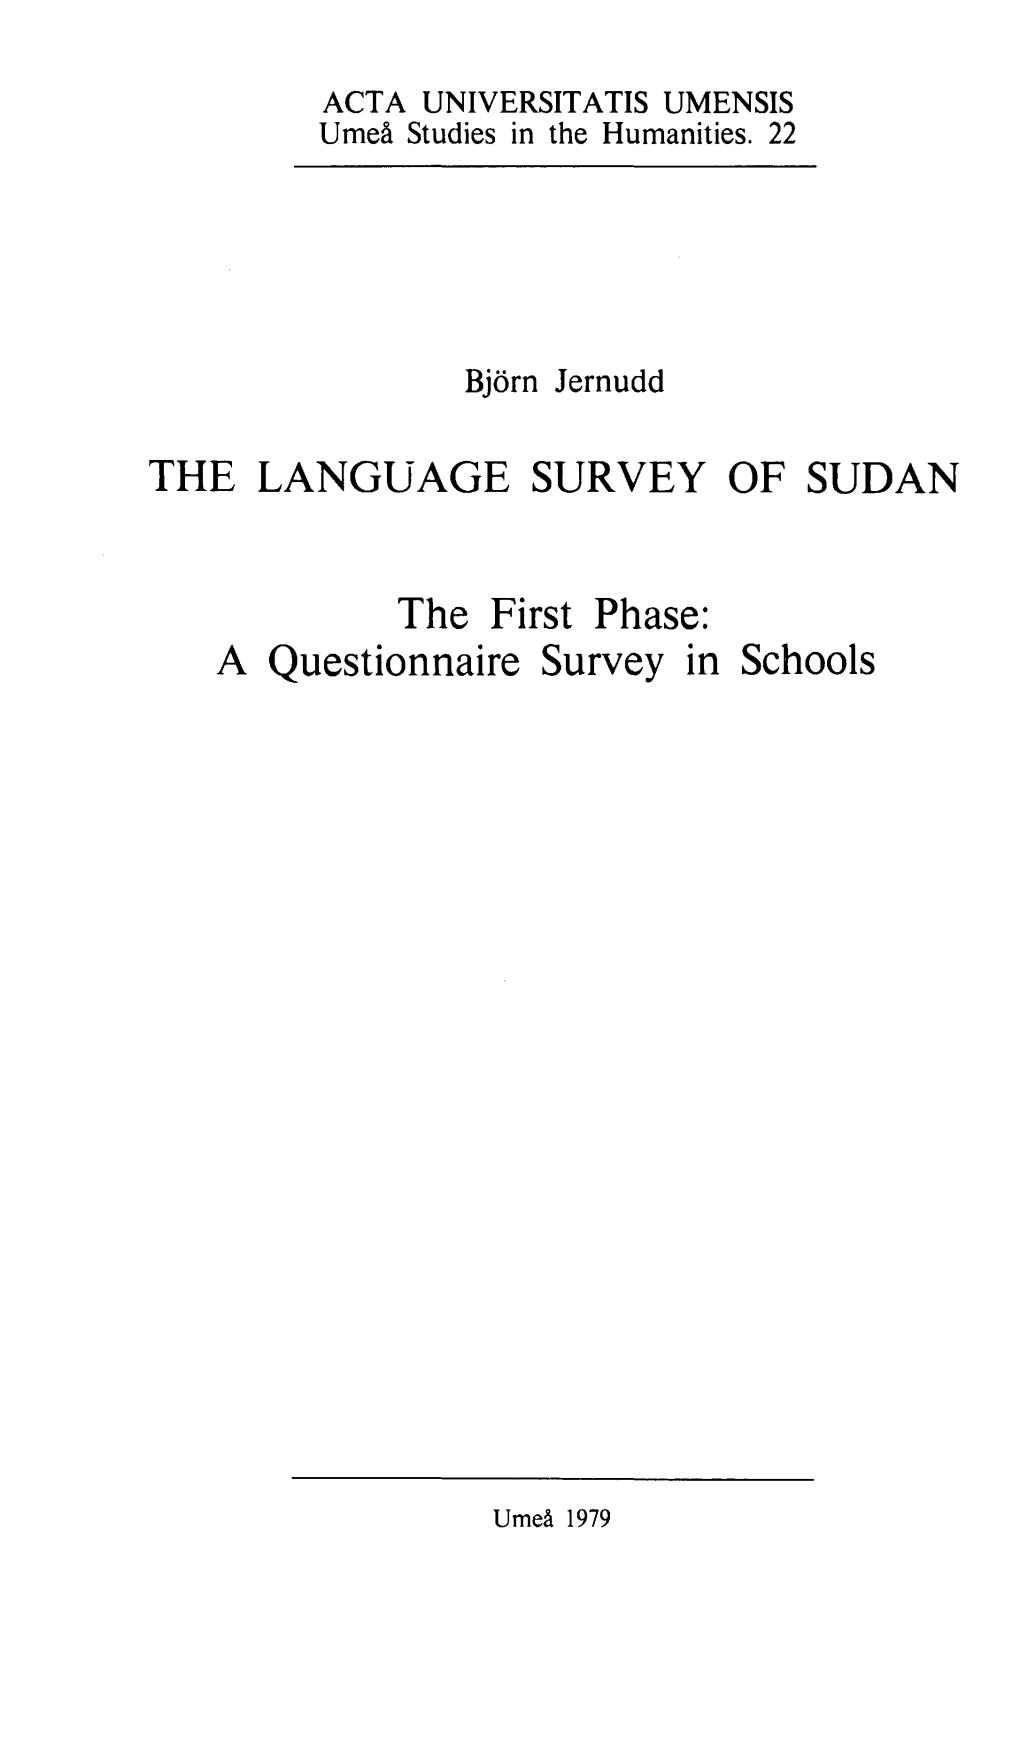 THE LANGUAGE SURVEY of SUDAN the First Phase: a Questionnaire Survey in Schools